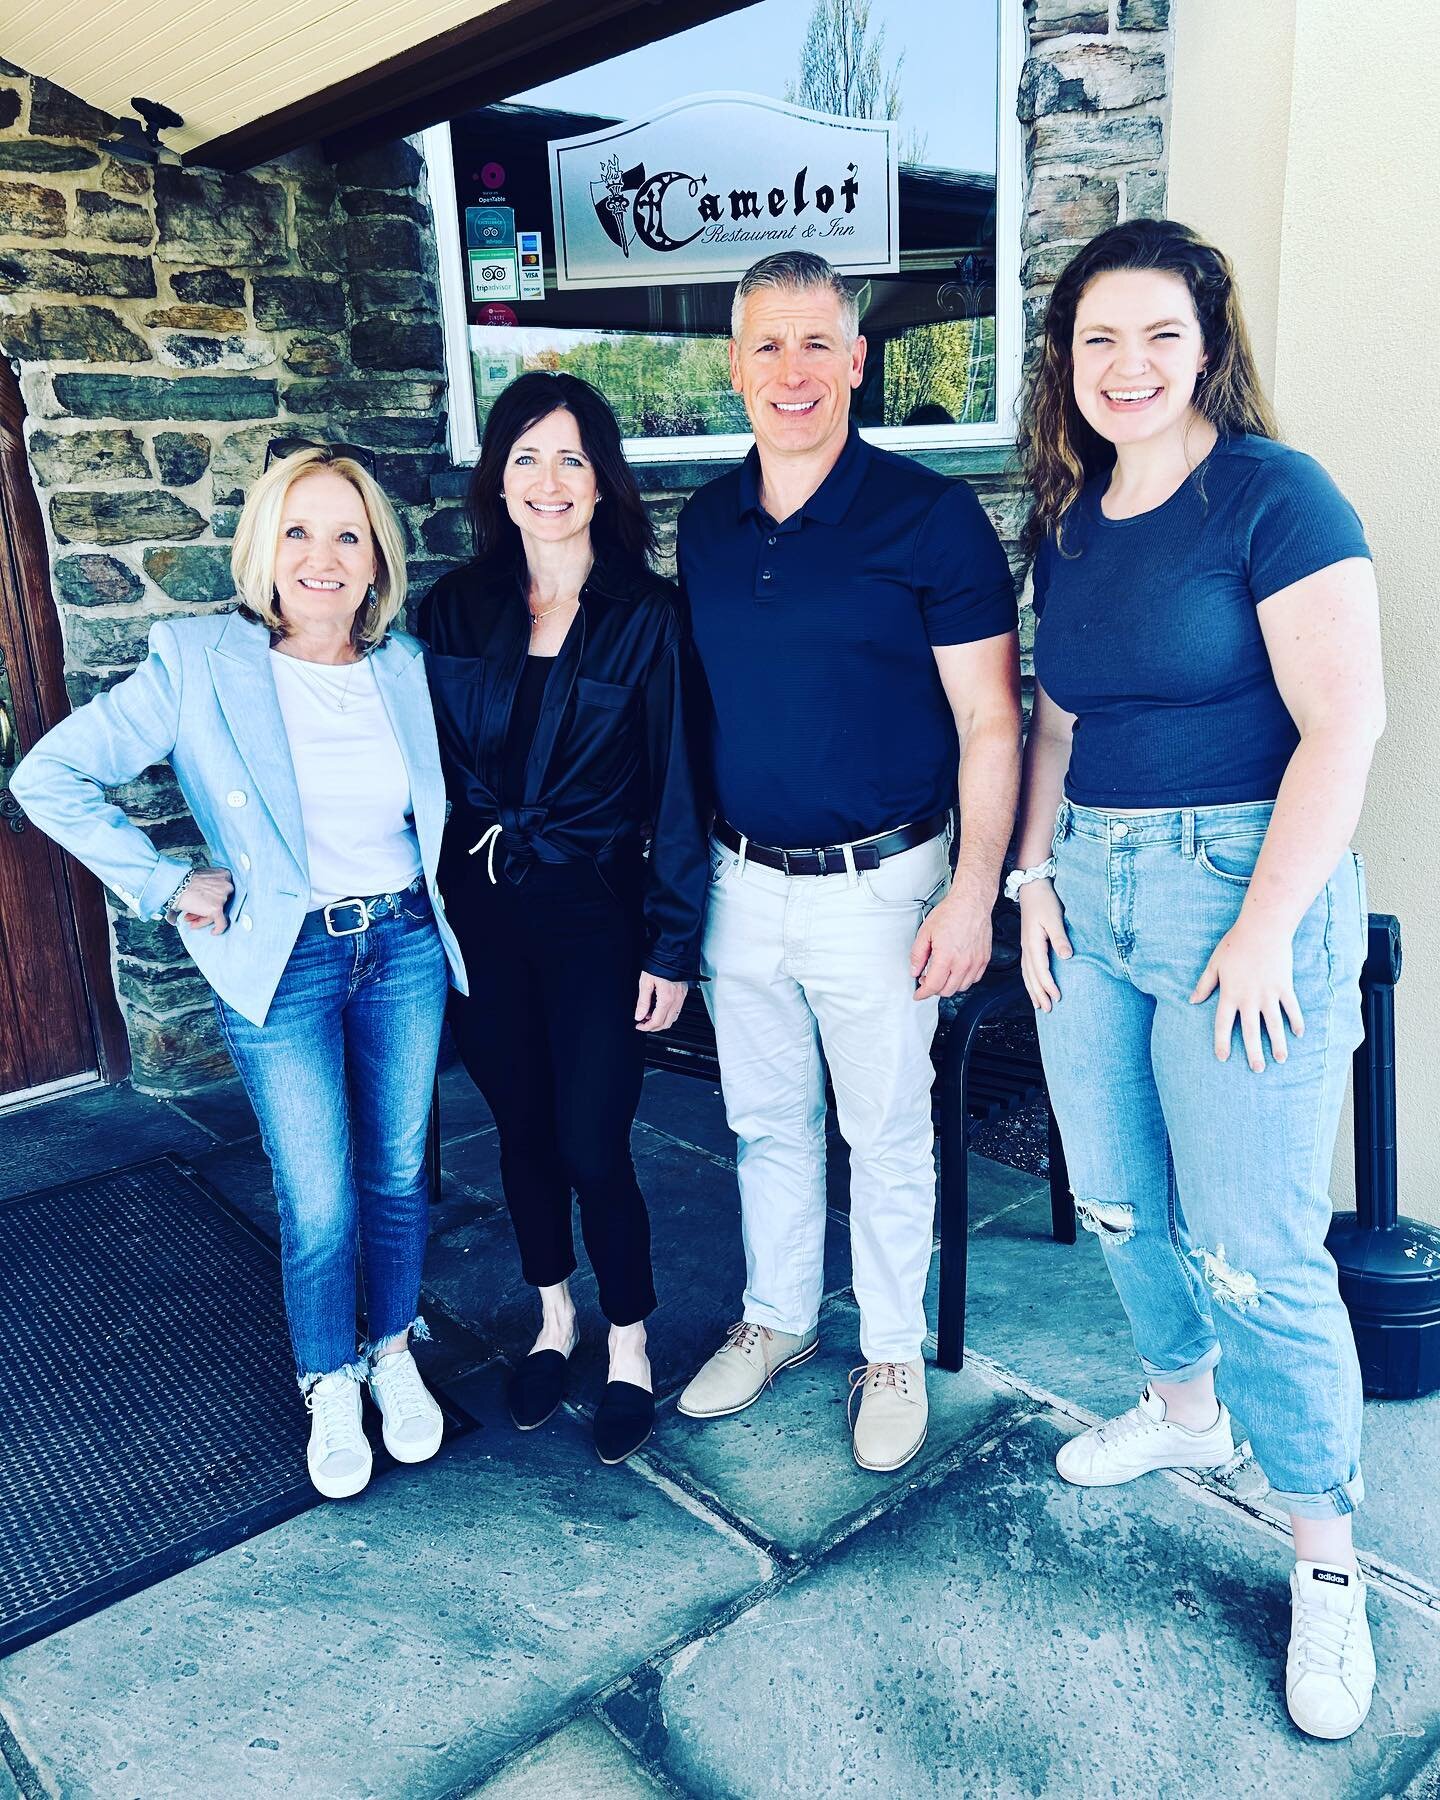 Enjoyed lunch together at our strategic planning meeting for our members @StudioU Fitness. Shout out to Camelot, Clarks Summit&hellip;.sooo delicious, great service!
#clarkssummit #nepa
#discovernepa 
#nepafitness #fitness
#personaltraining
#smallgro